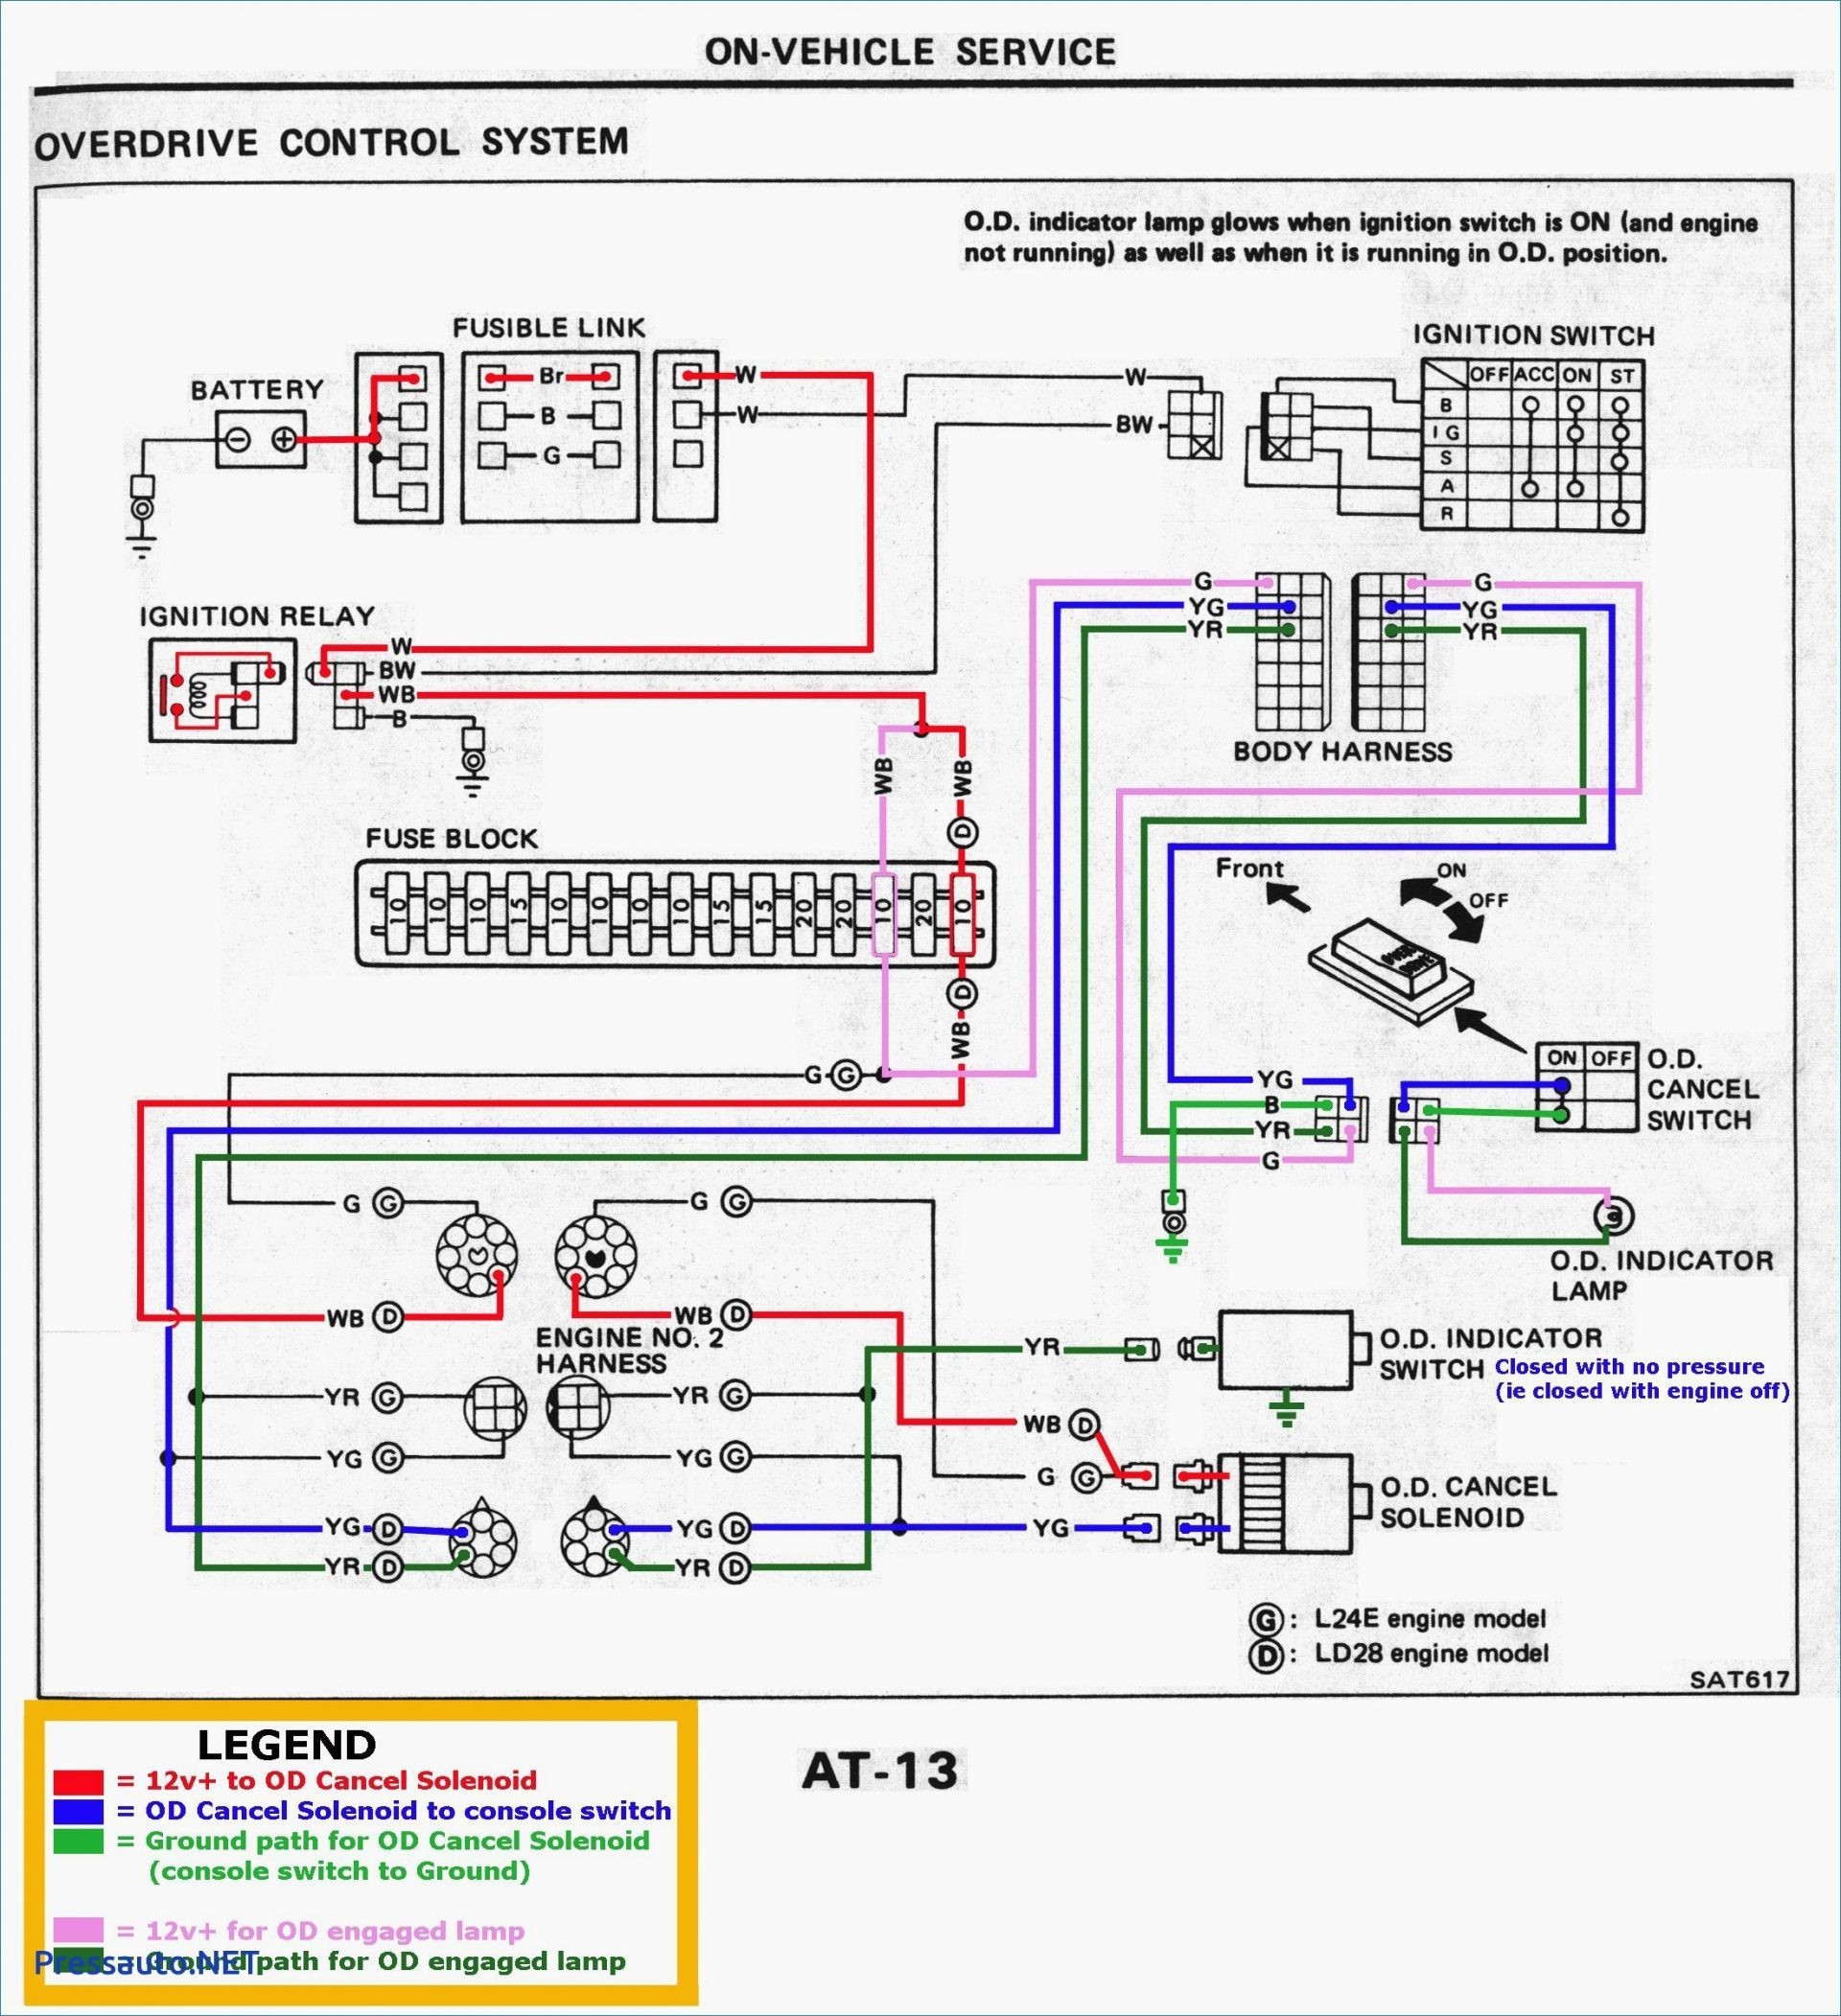 Wiring Diagram for Light Switch and Two Lights 2017 Wiring Diagram for 2 Lights and 1